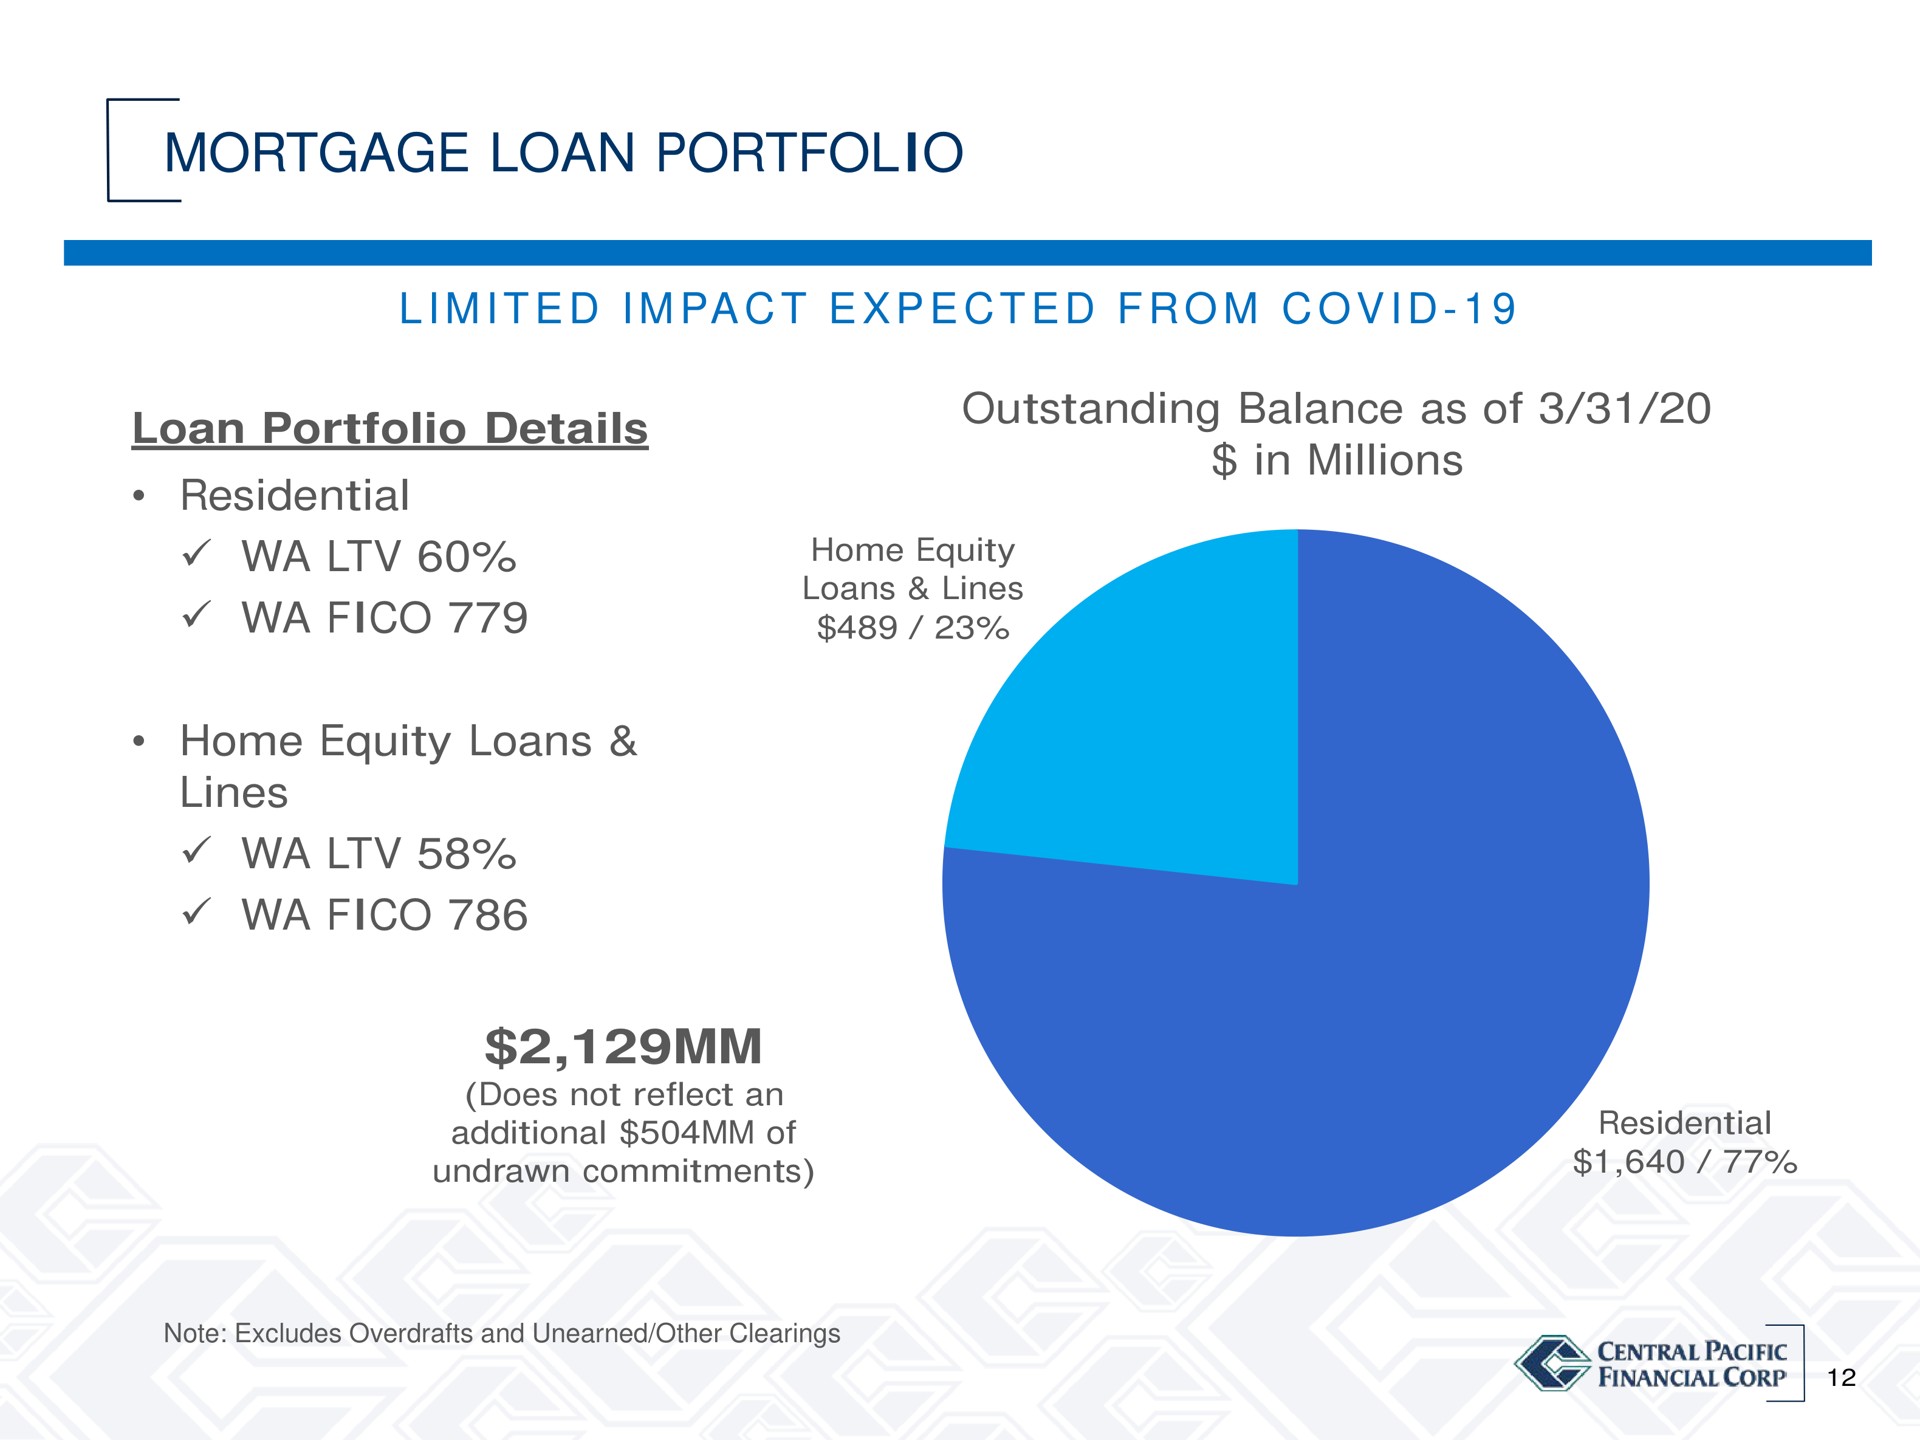 mortgage loan portfolio i i i i outstanding balance as of in millions loan portfolio details residential fico home equity loans lines fico | Central Pacific Financial